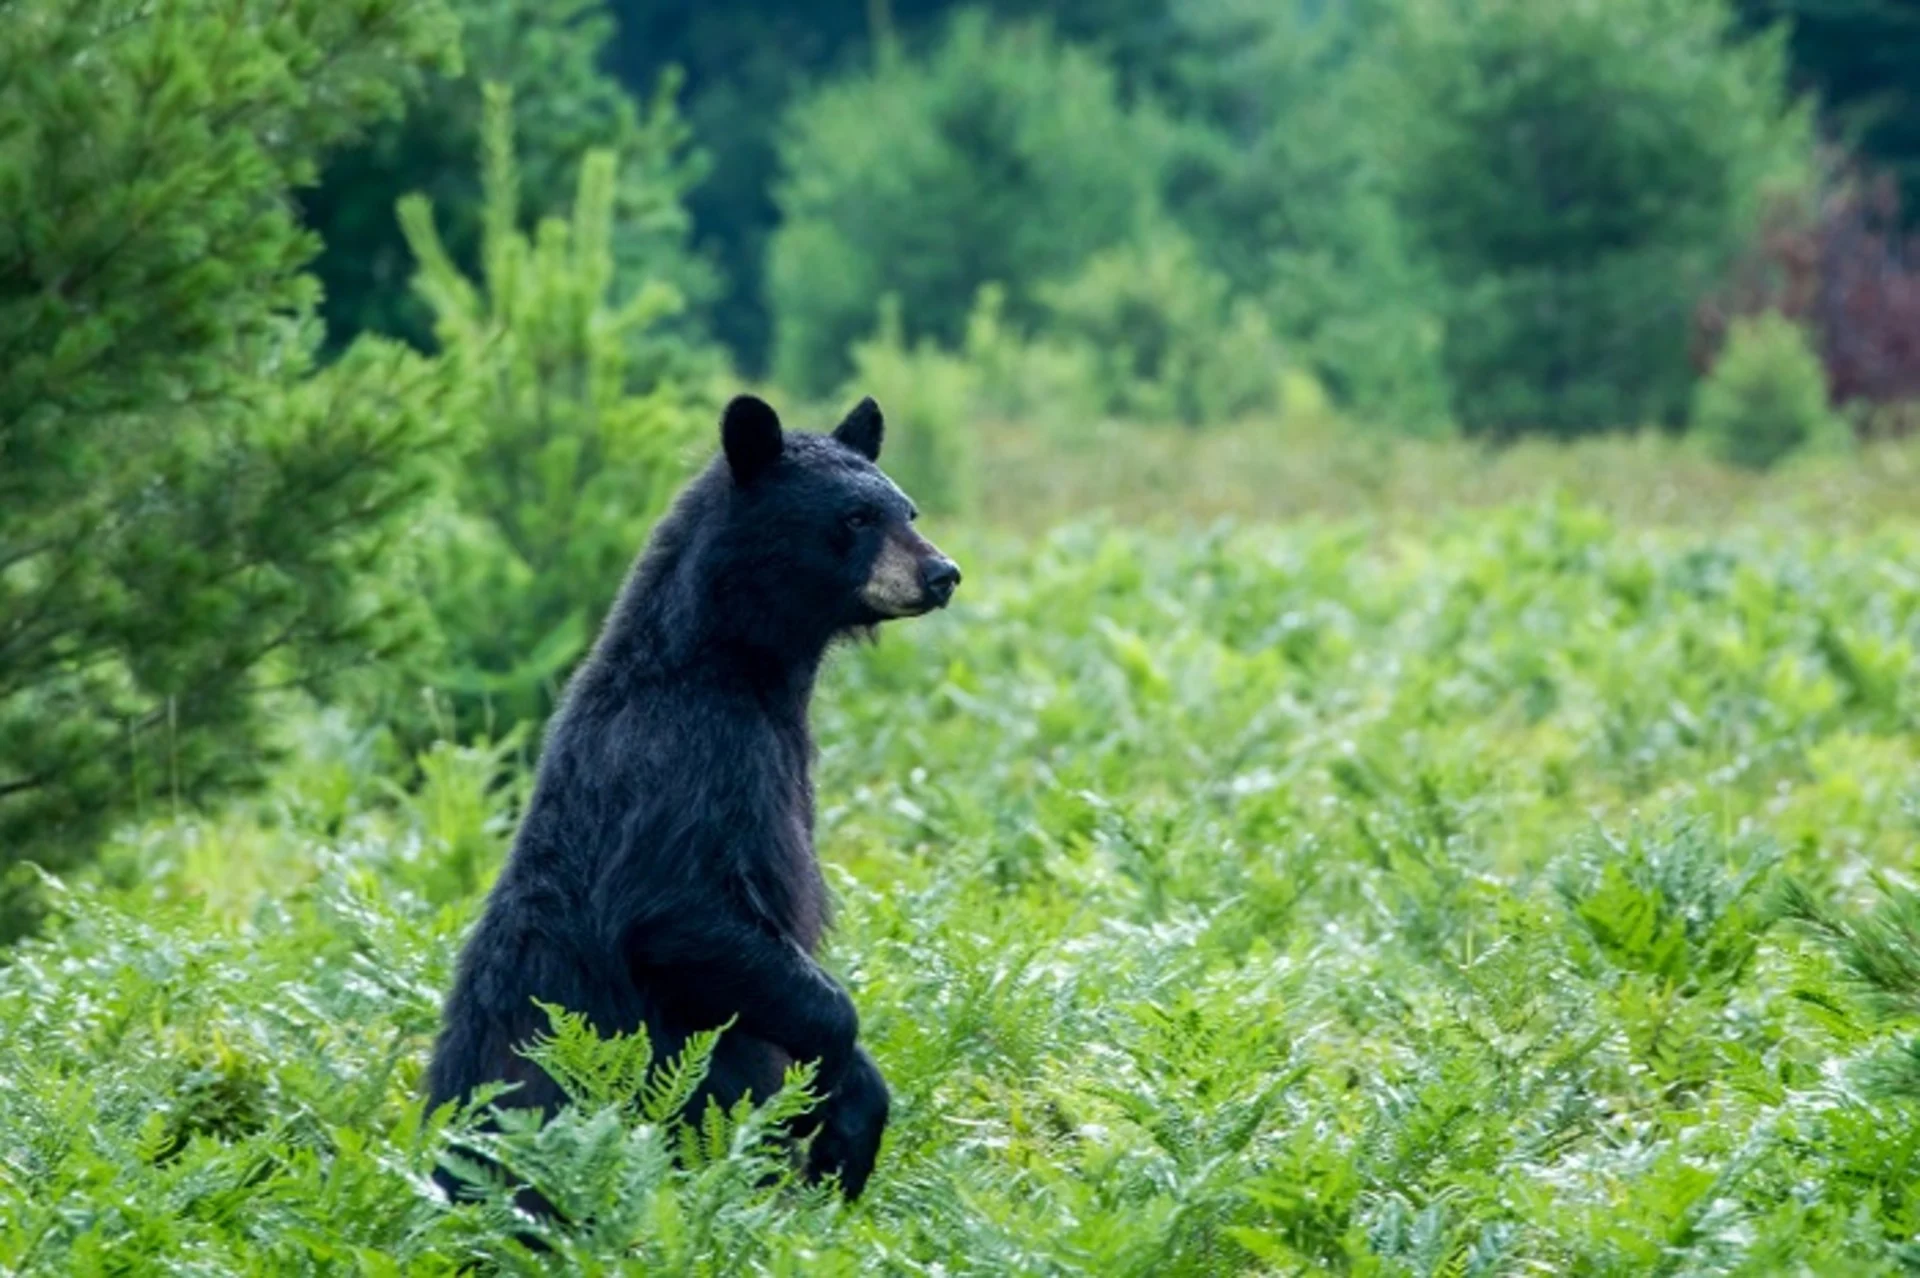 Reminder: Give black bears personal space as they prepare for hibernation